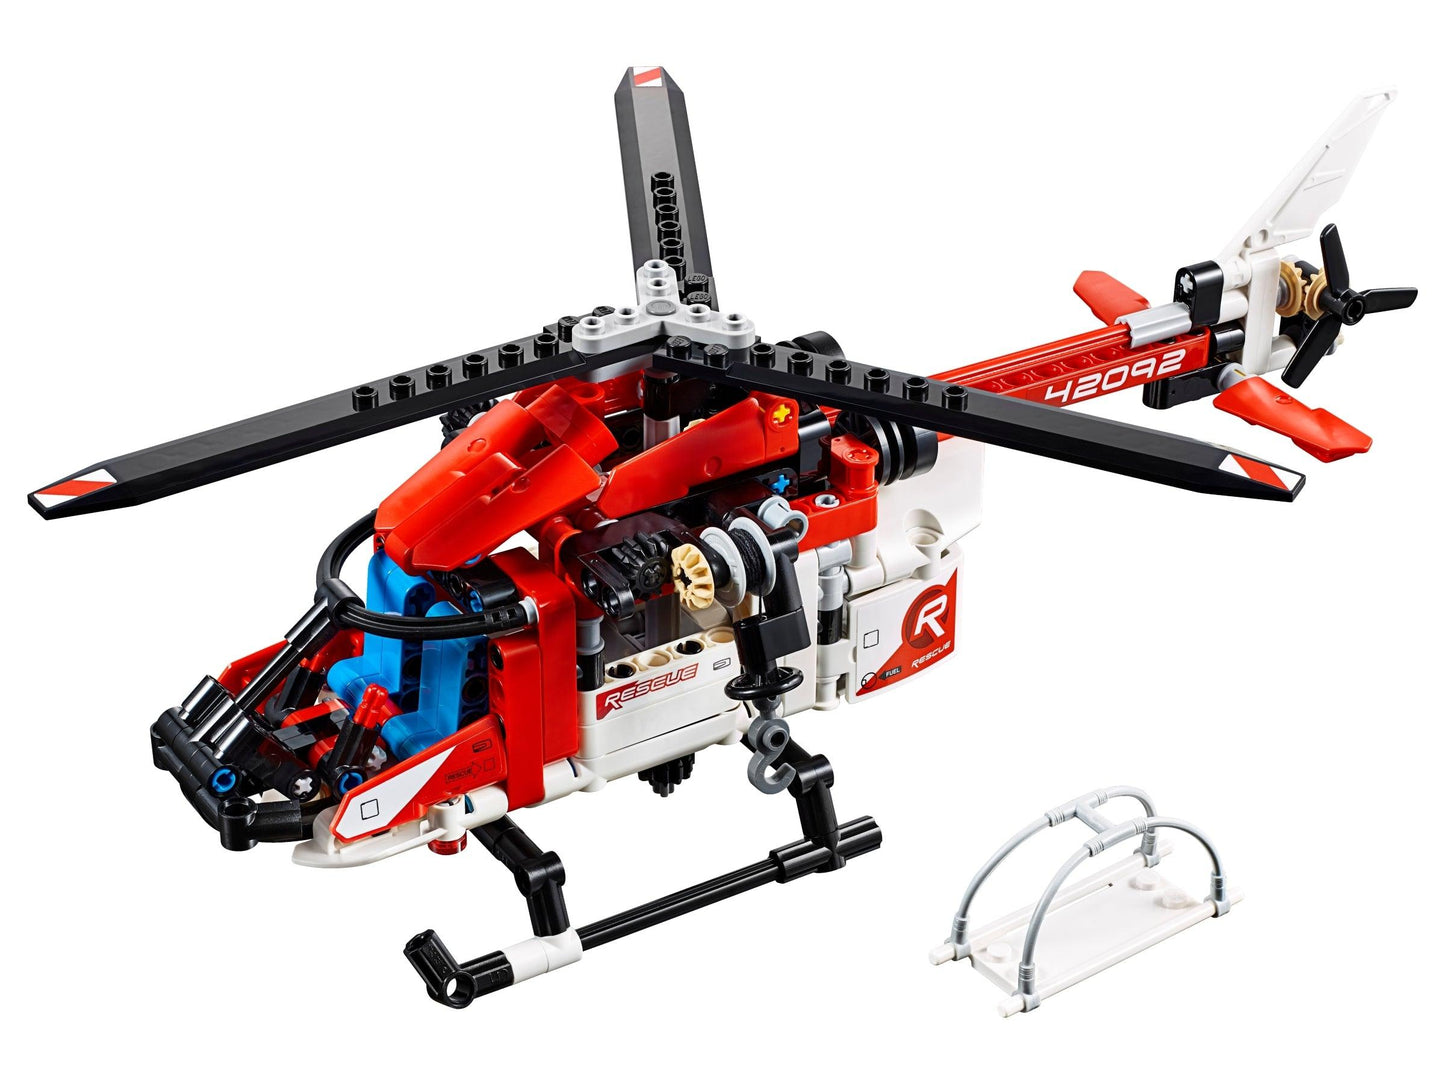 LEGO Reddings Helicopter 42092 Technic | 2TTOYS ✓ Official shop<br>